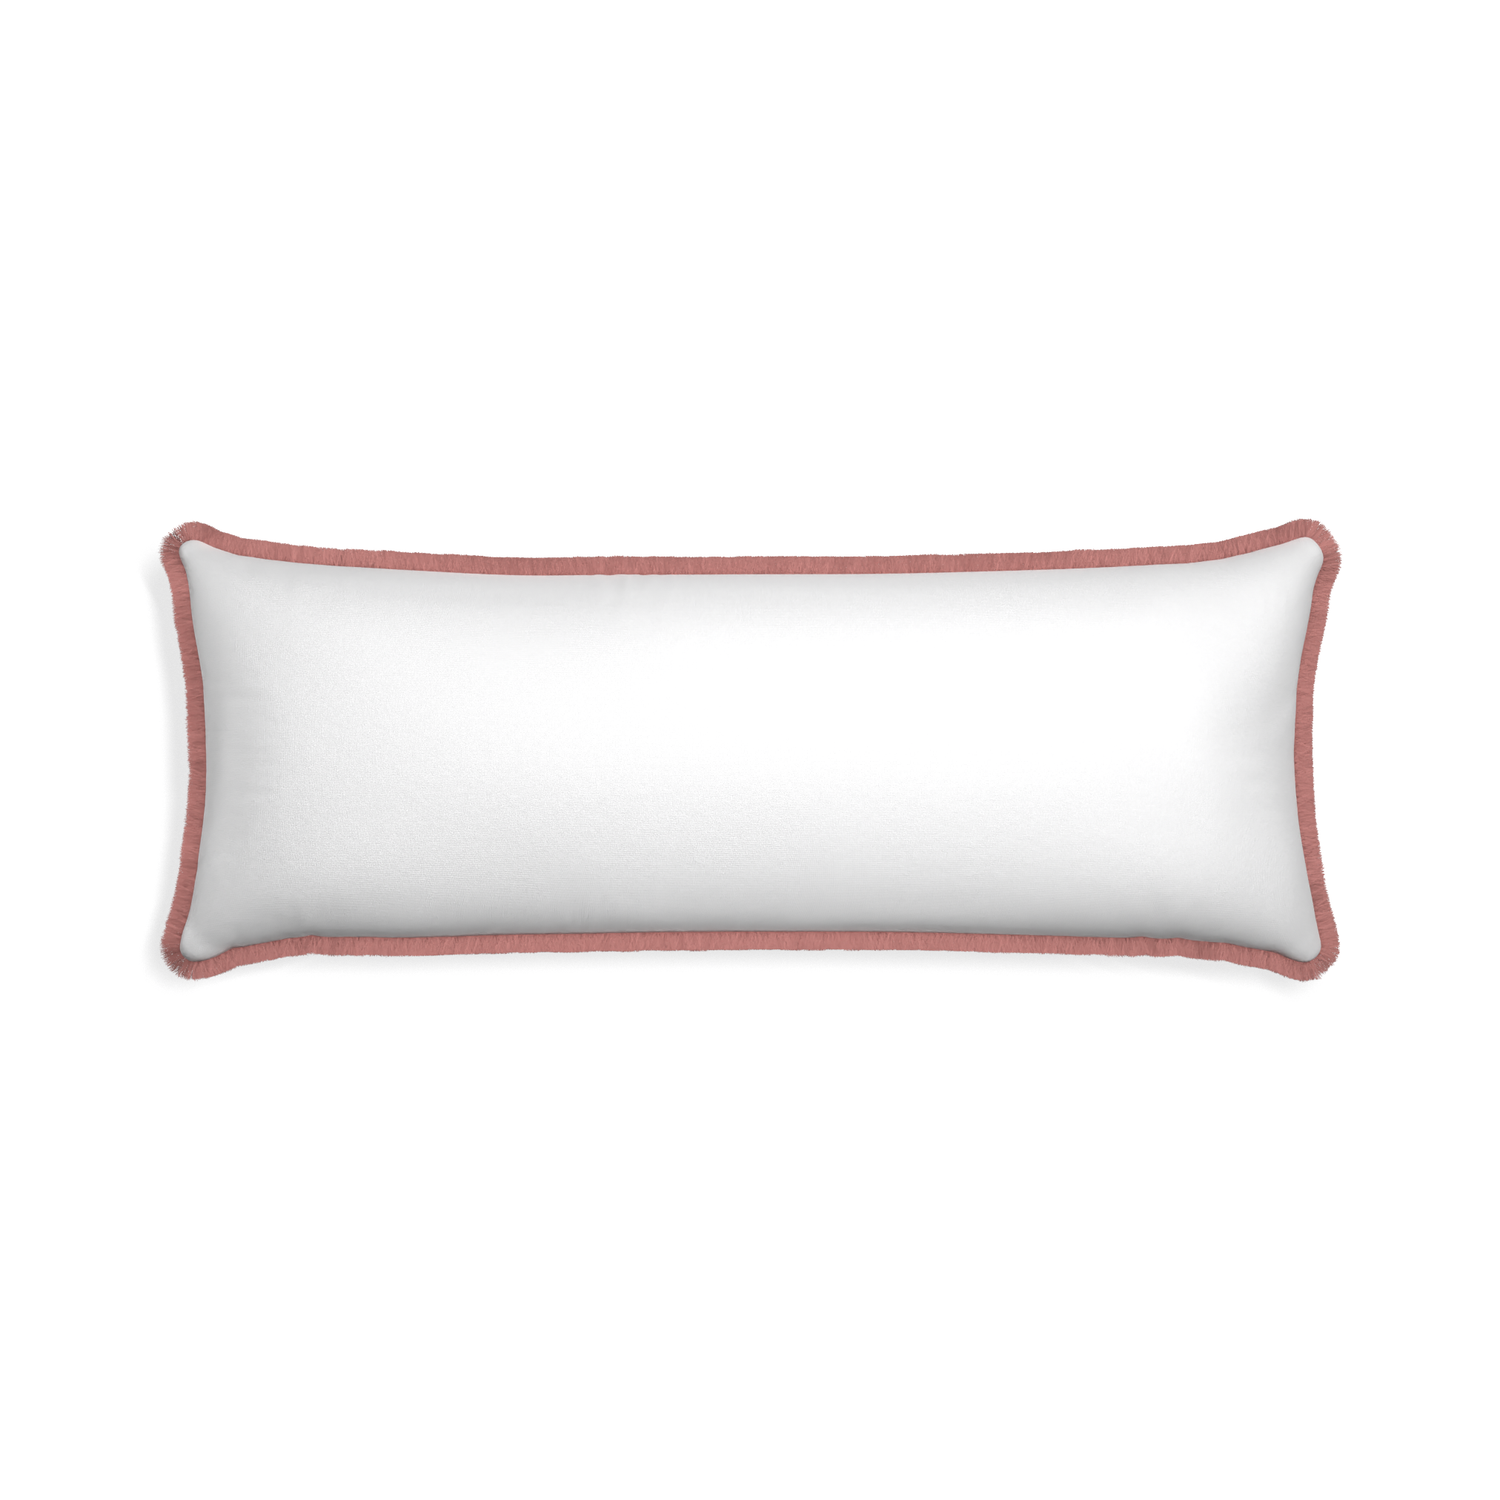 Xl-lumbar snow custom white cottonpillow with d fringe on white background